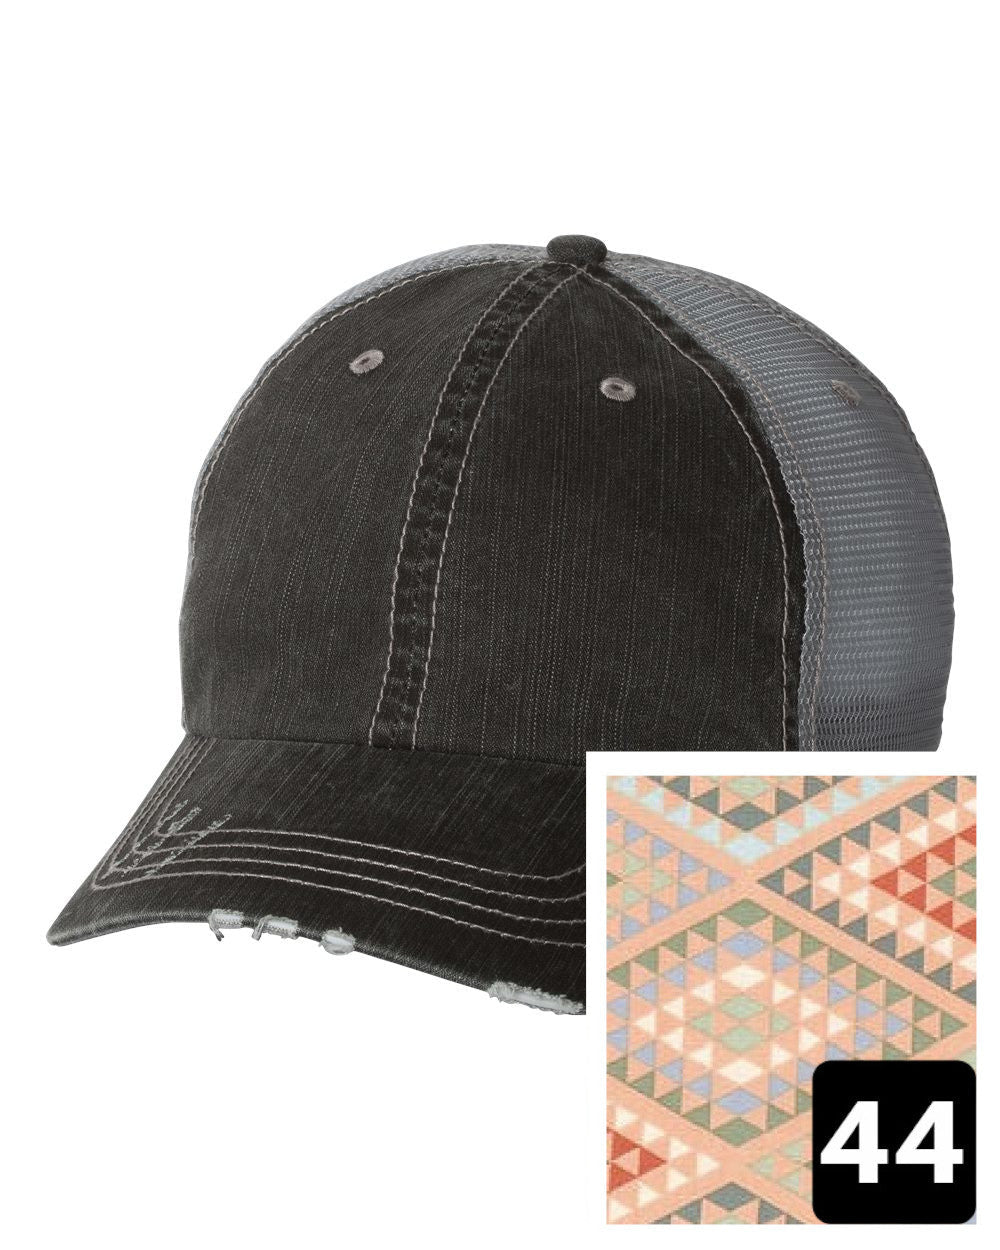 gray distressed trucker hat with navy coral and white chevron fabric state of North Carolina